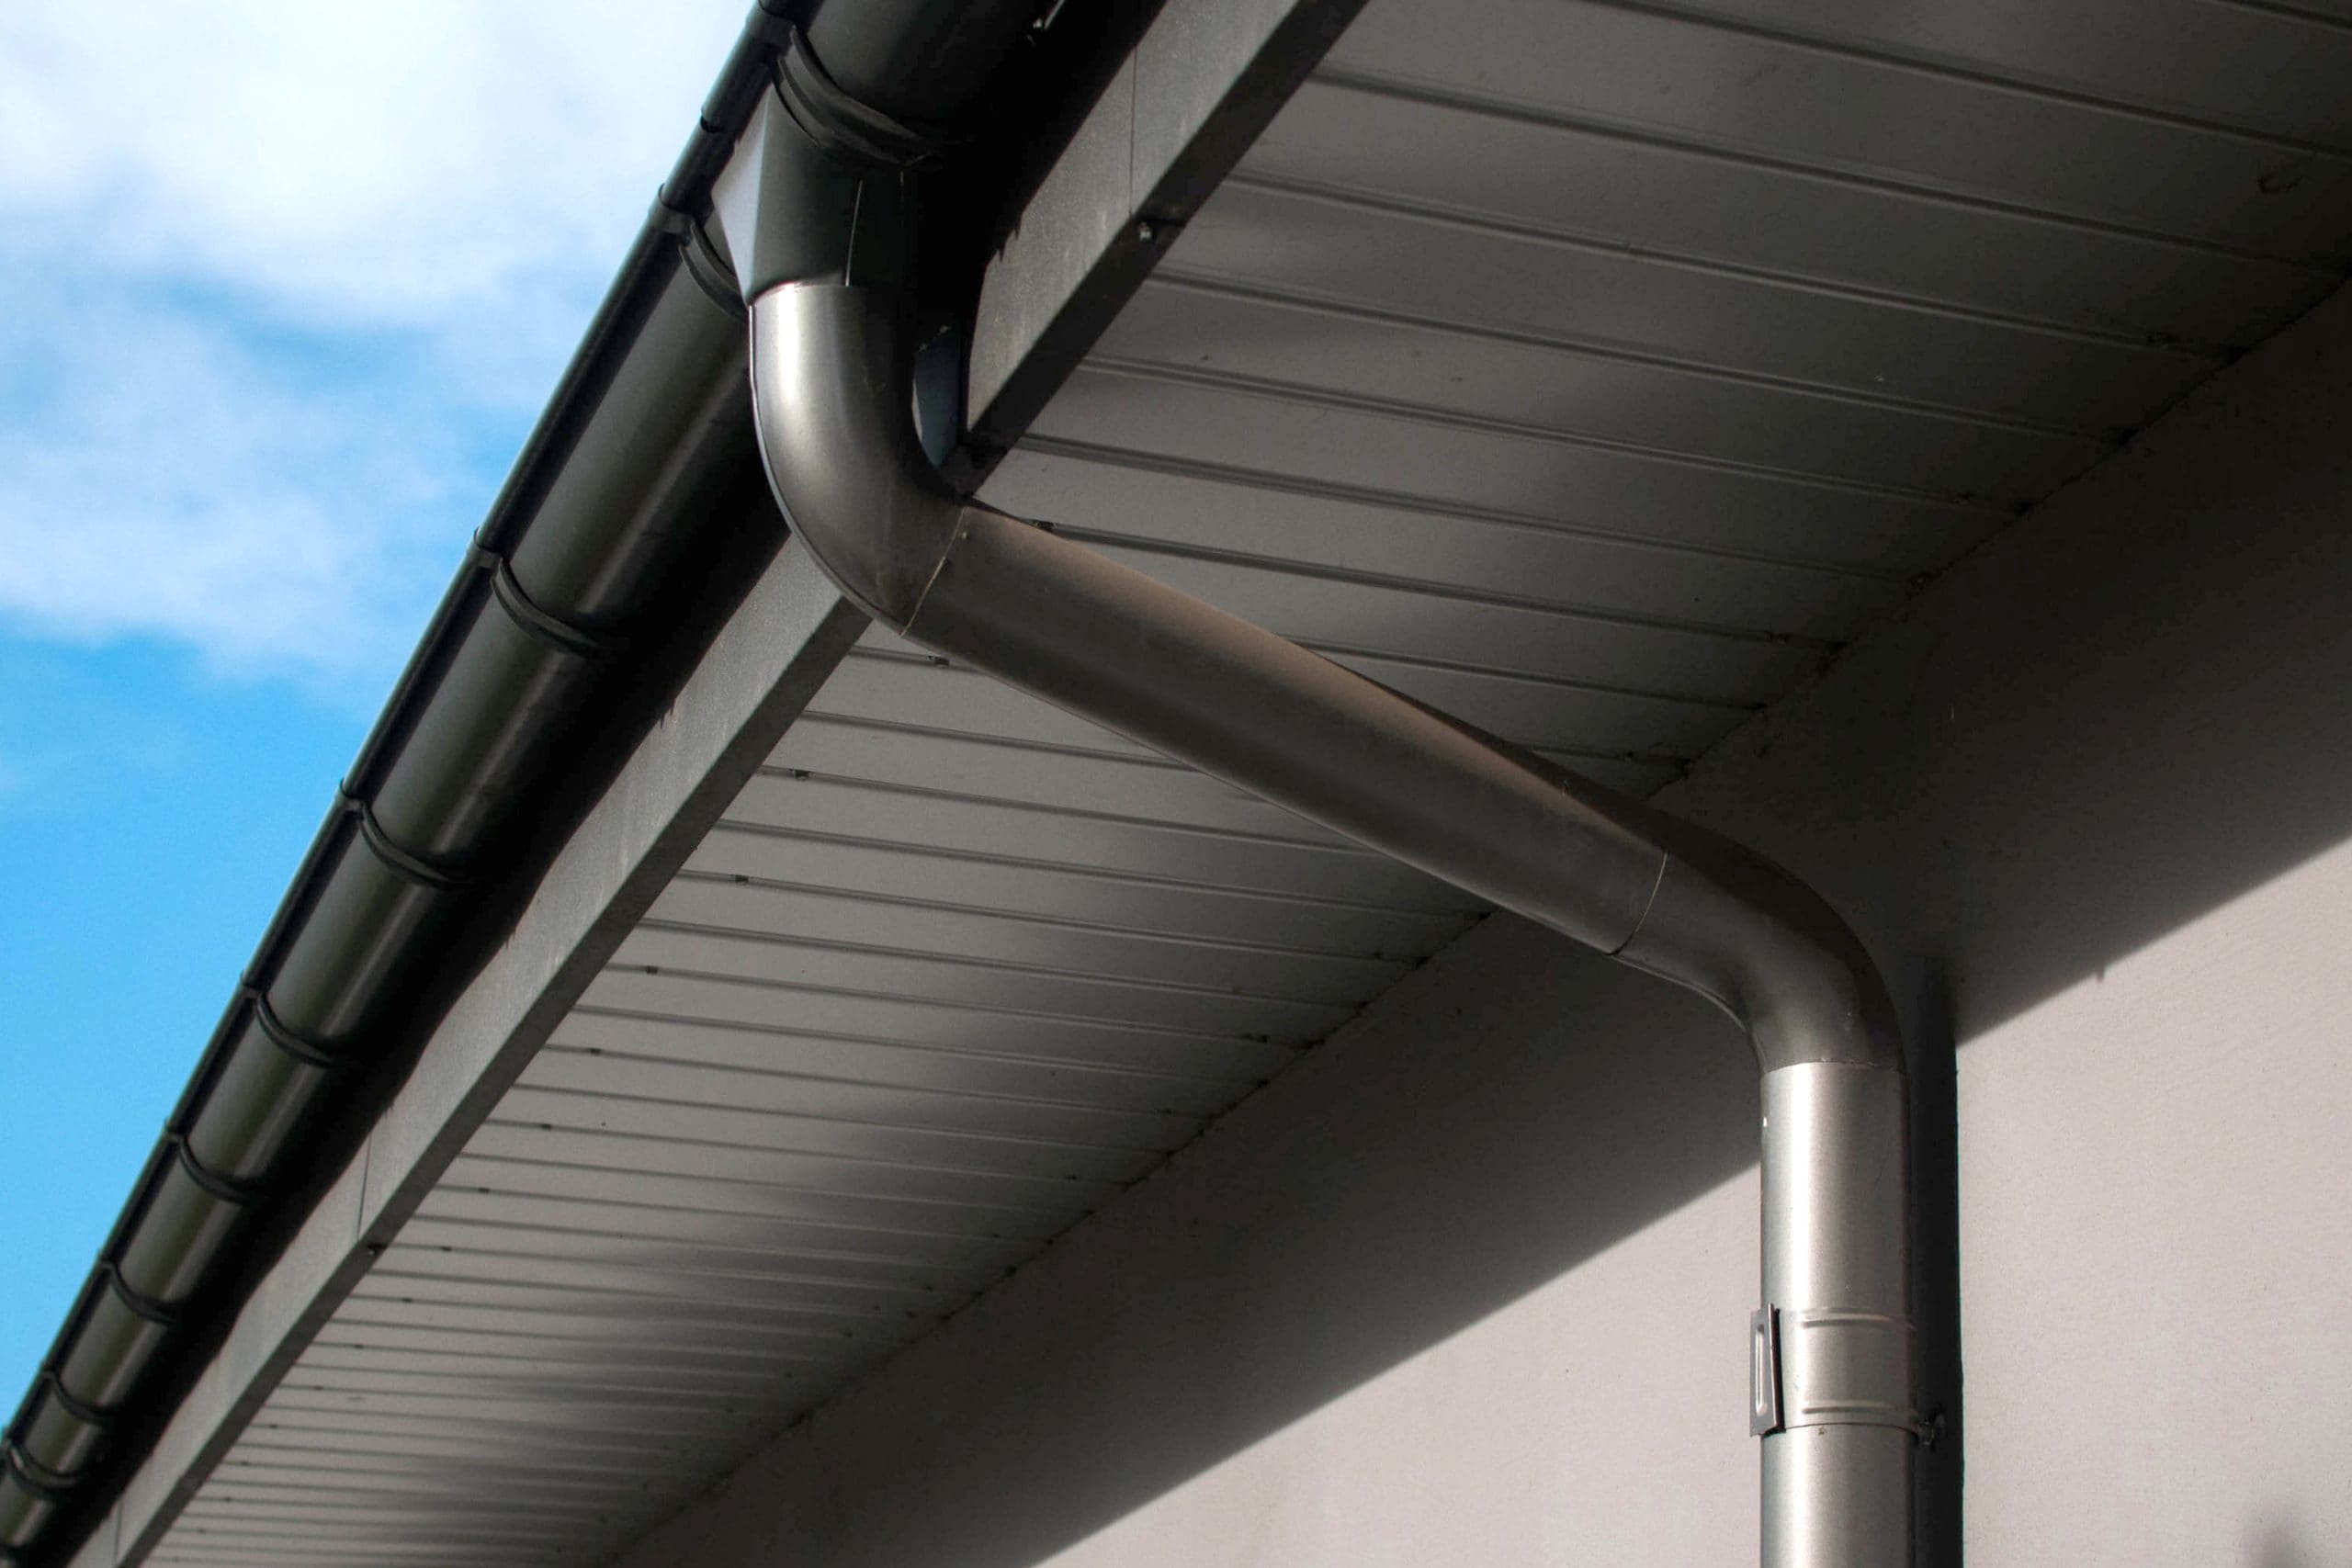 New, professionally-installed galvanized gutters